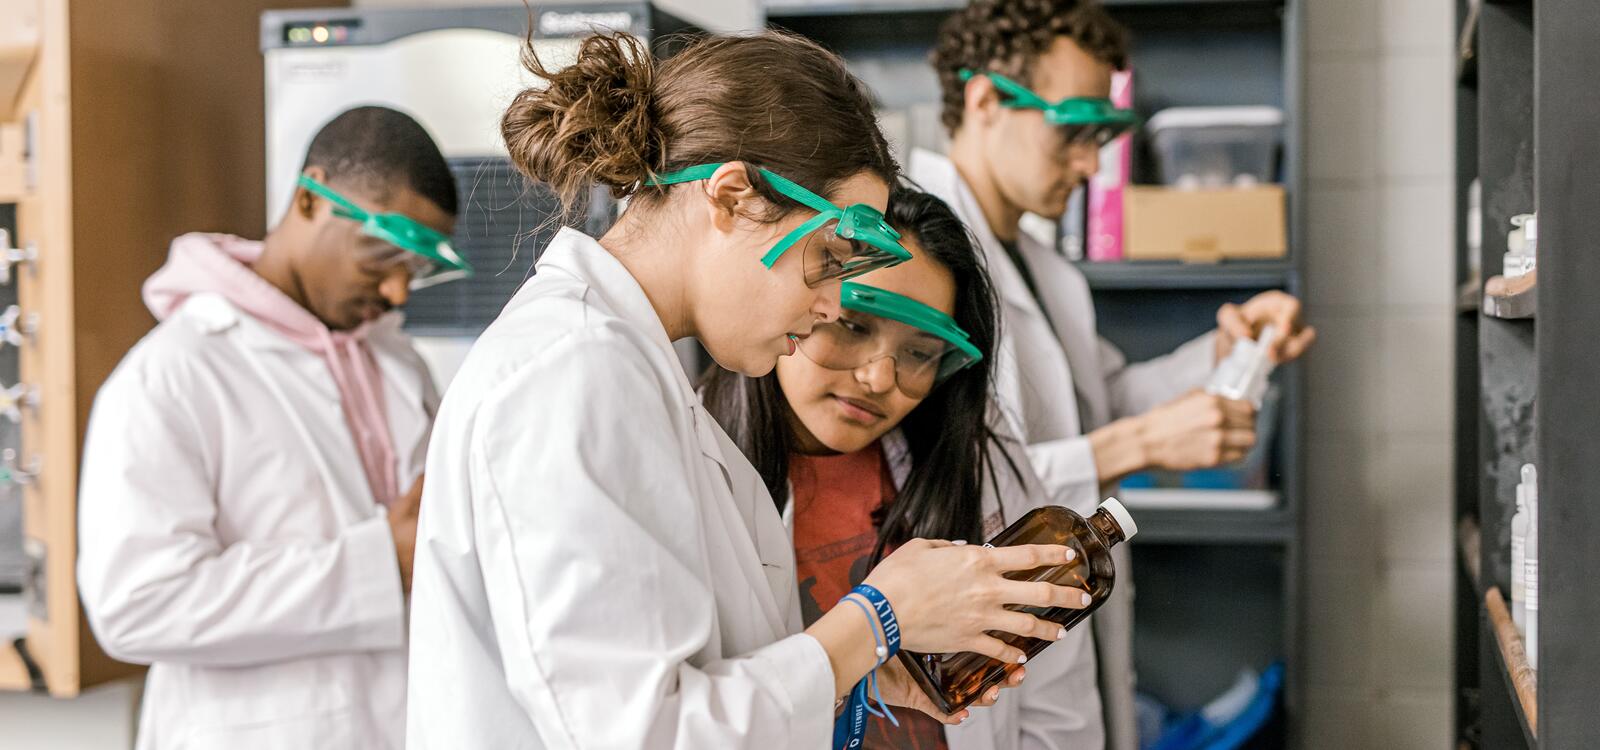 Two students, dressed in lab coats and goggles, pick up a bottle to read the label of the chemical